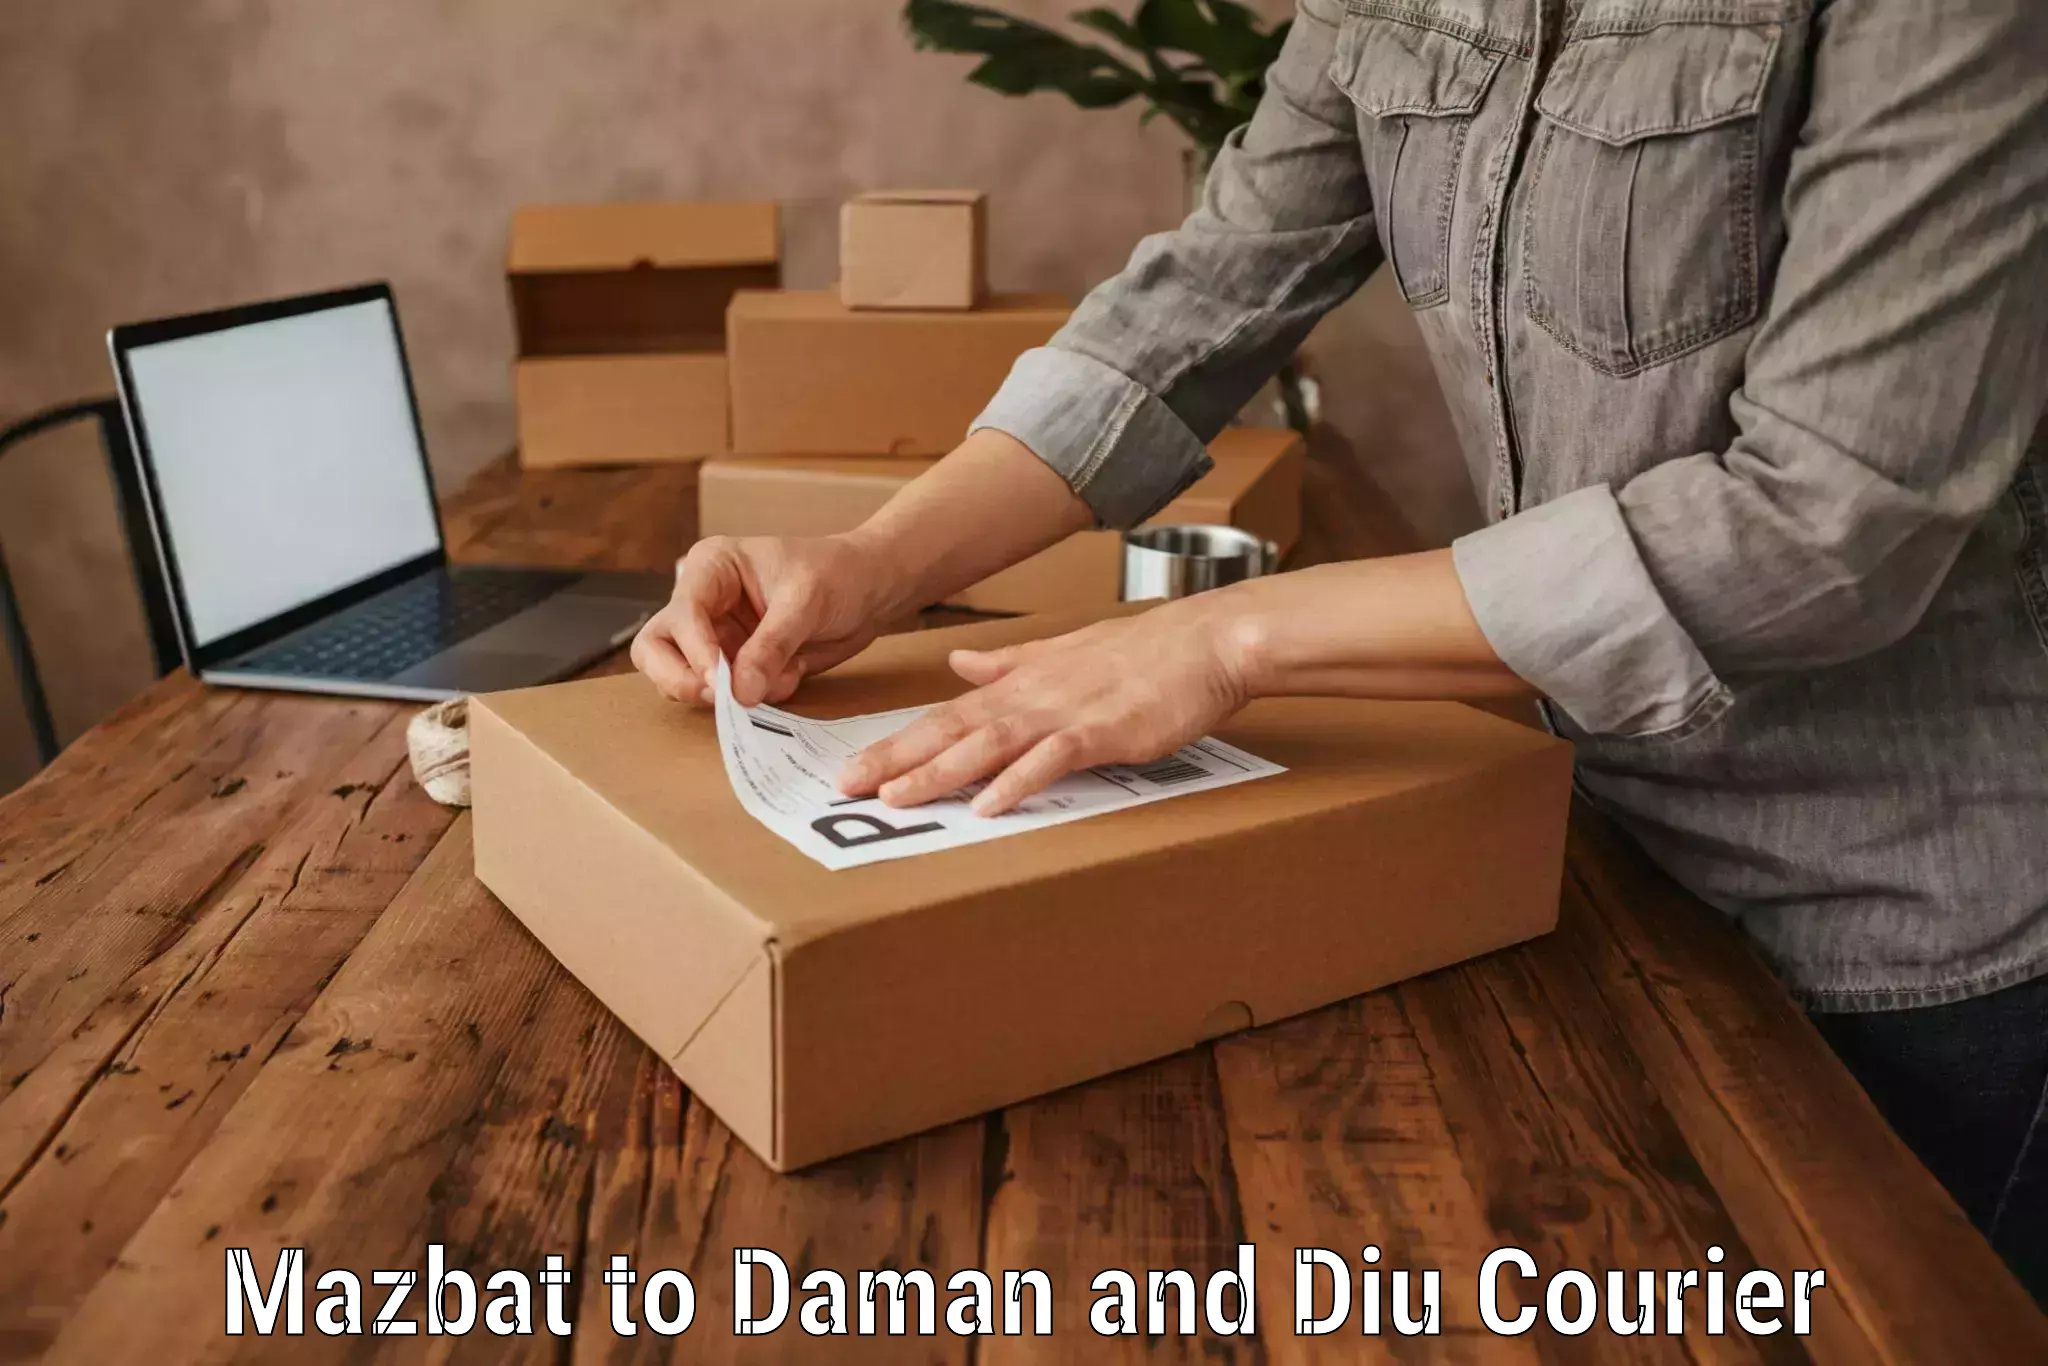 Luggage transport consulting Mazbat to Daman and Diu